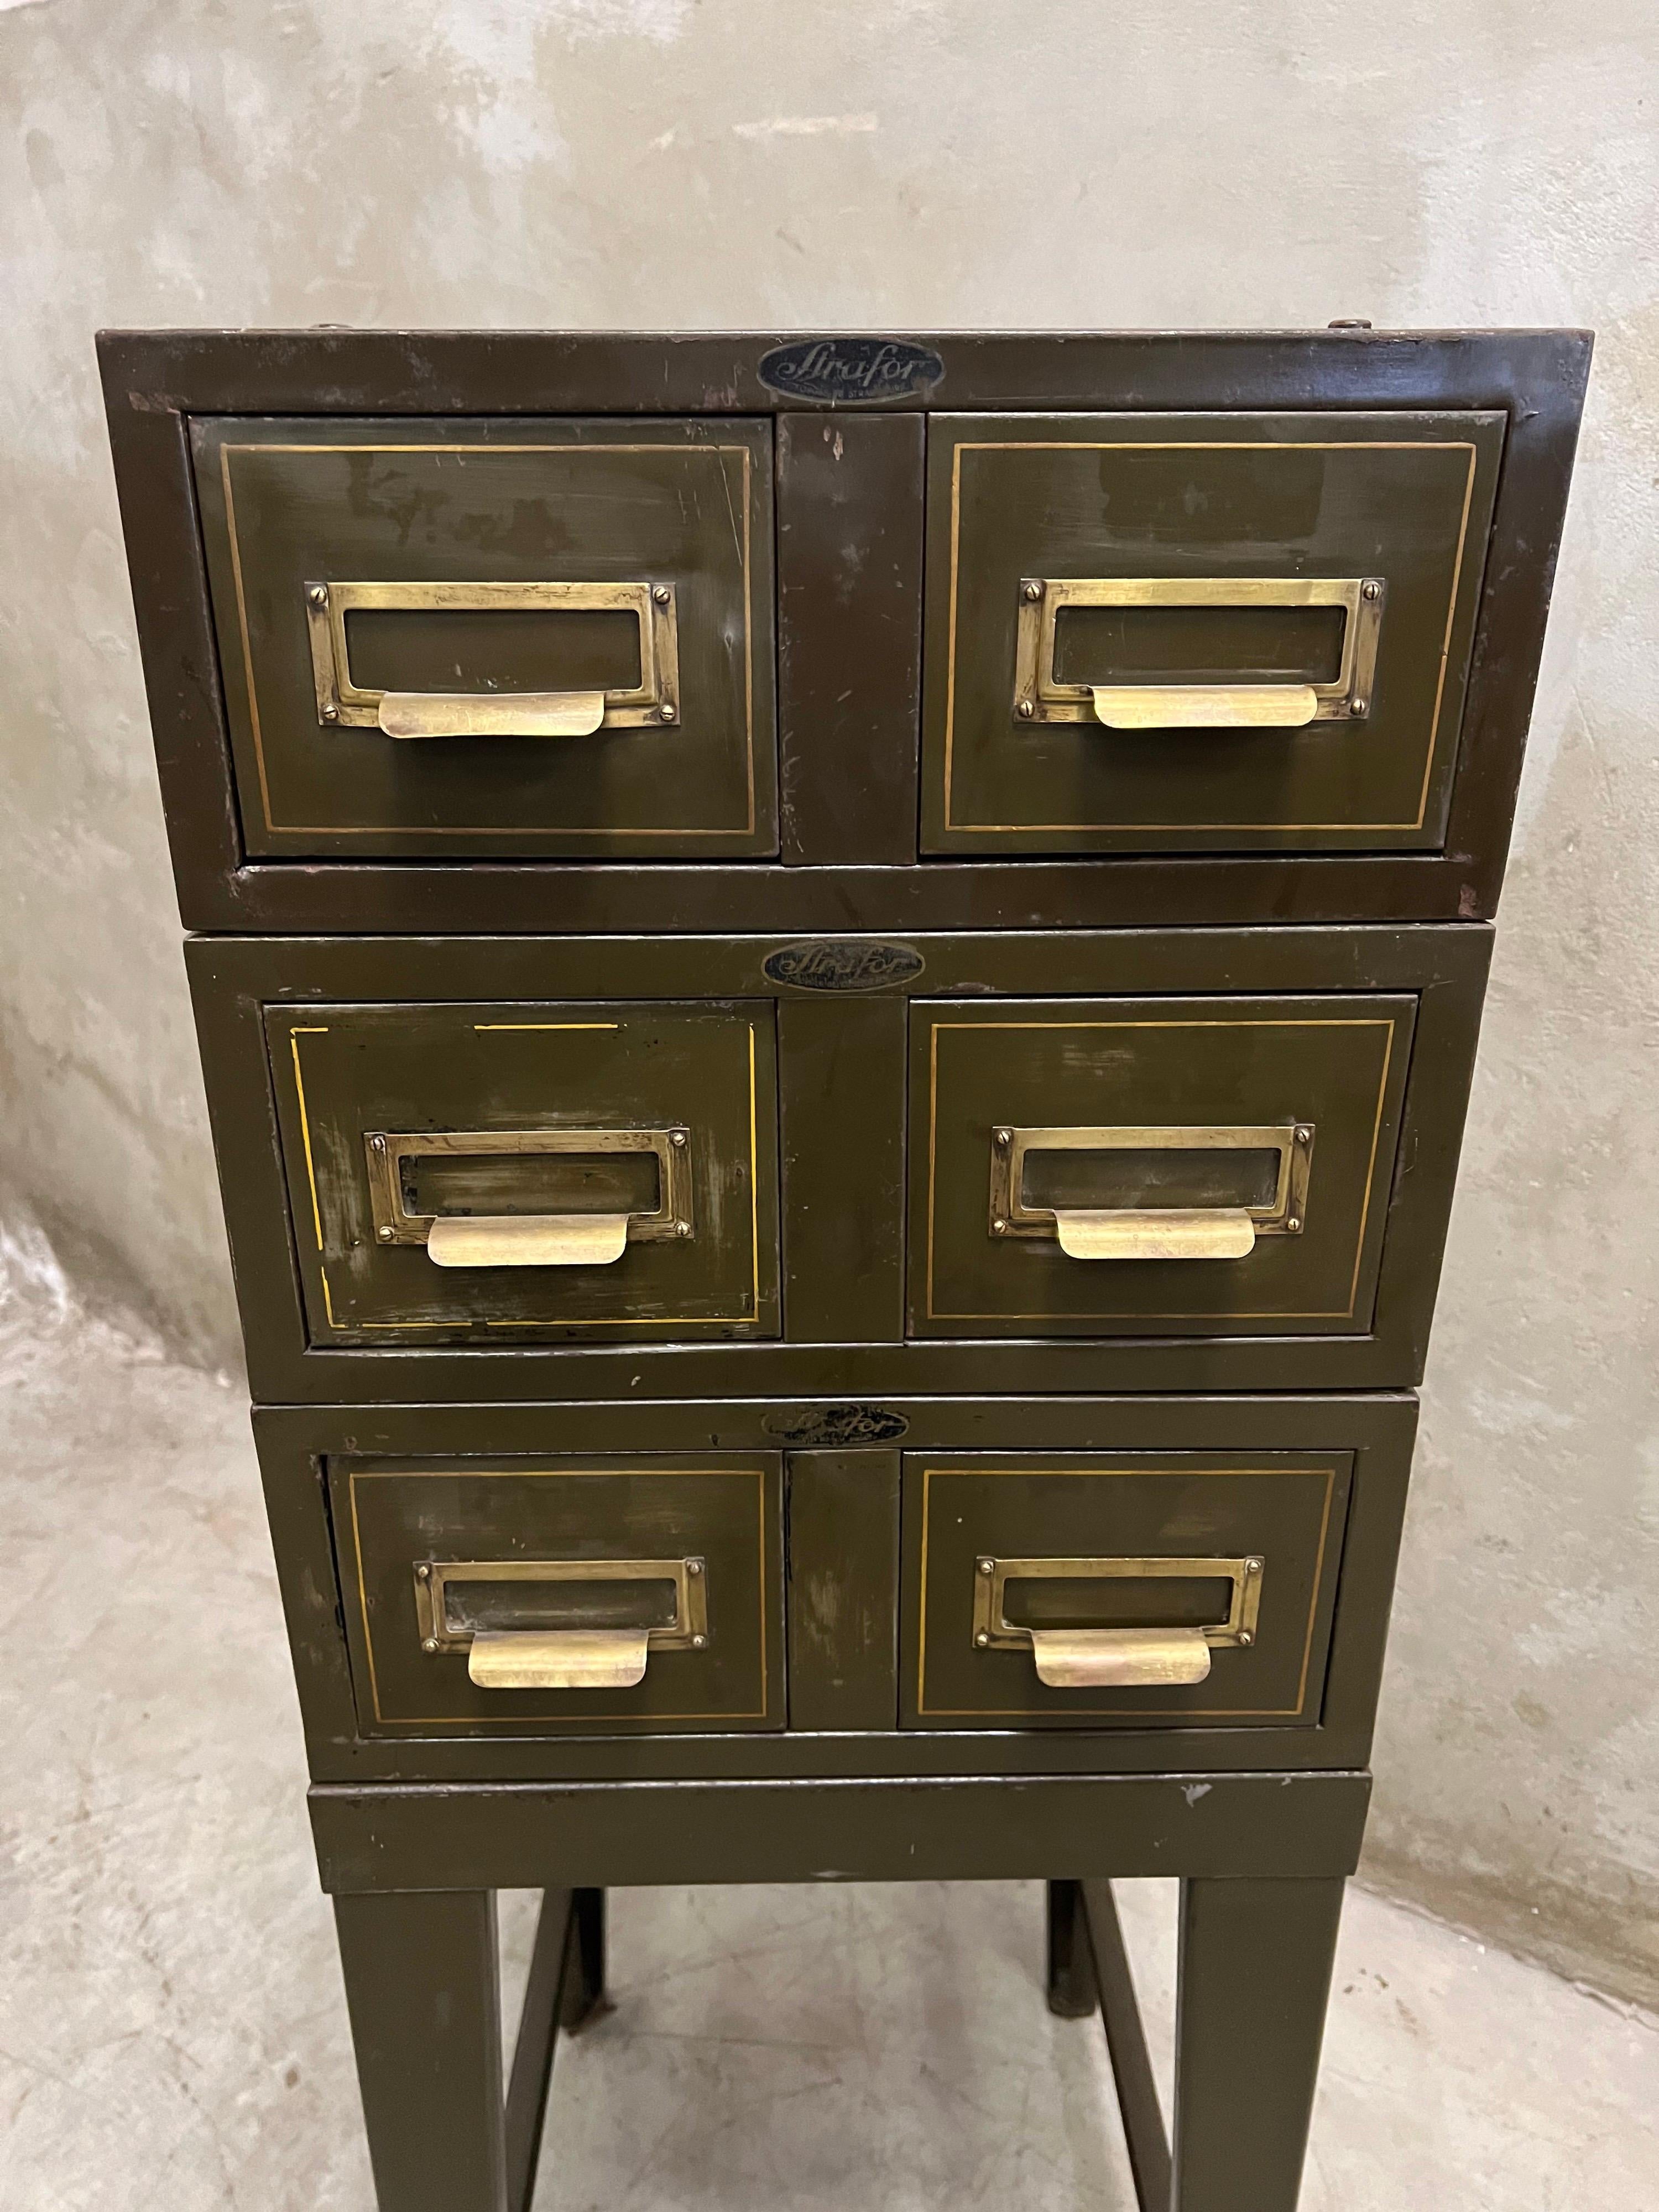 French Industrial Cabinet Strafor Forges Strasbourgh, France, 1930s Original Paint